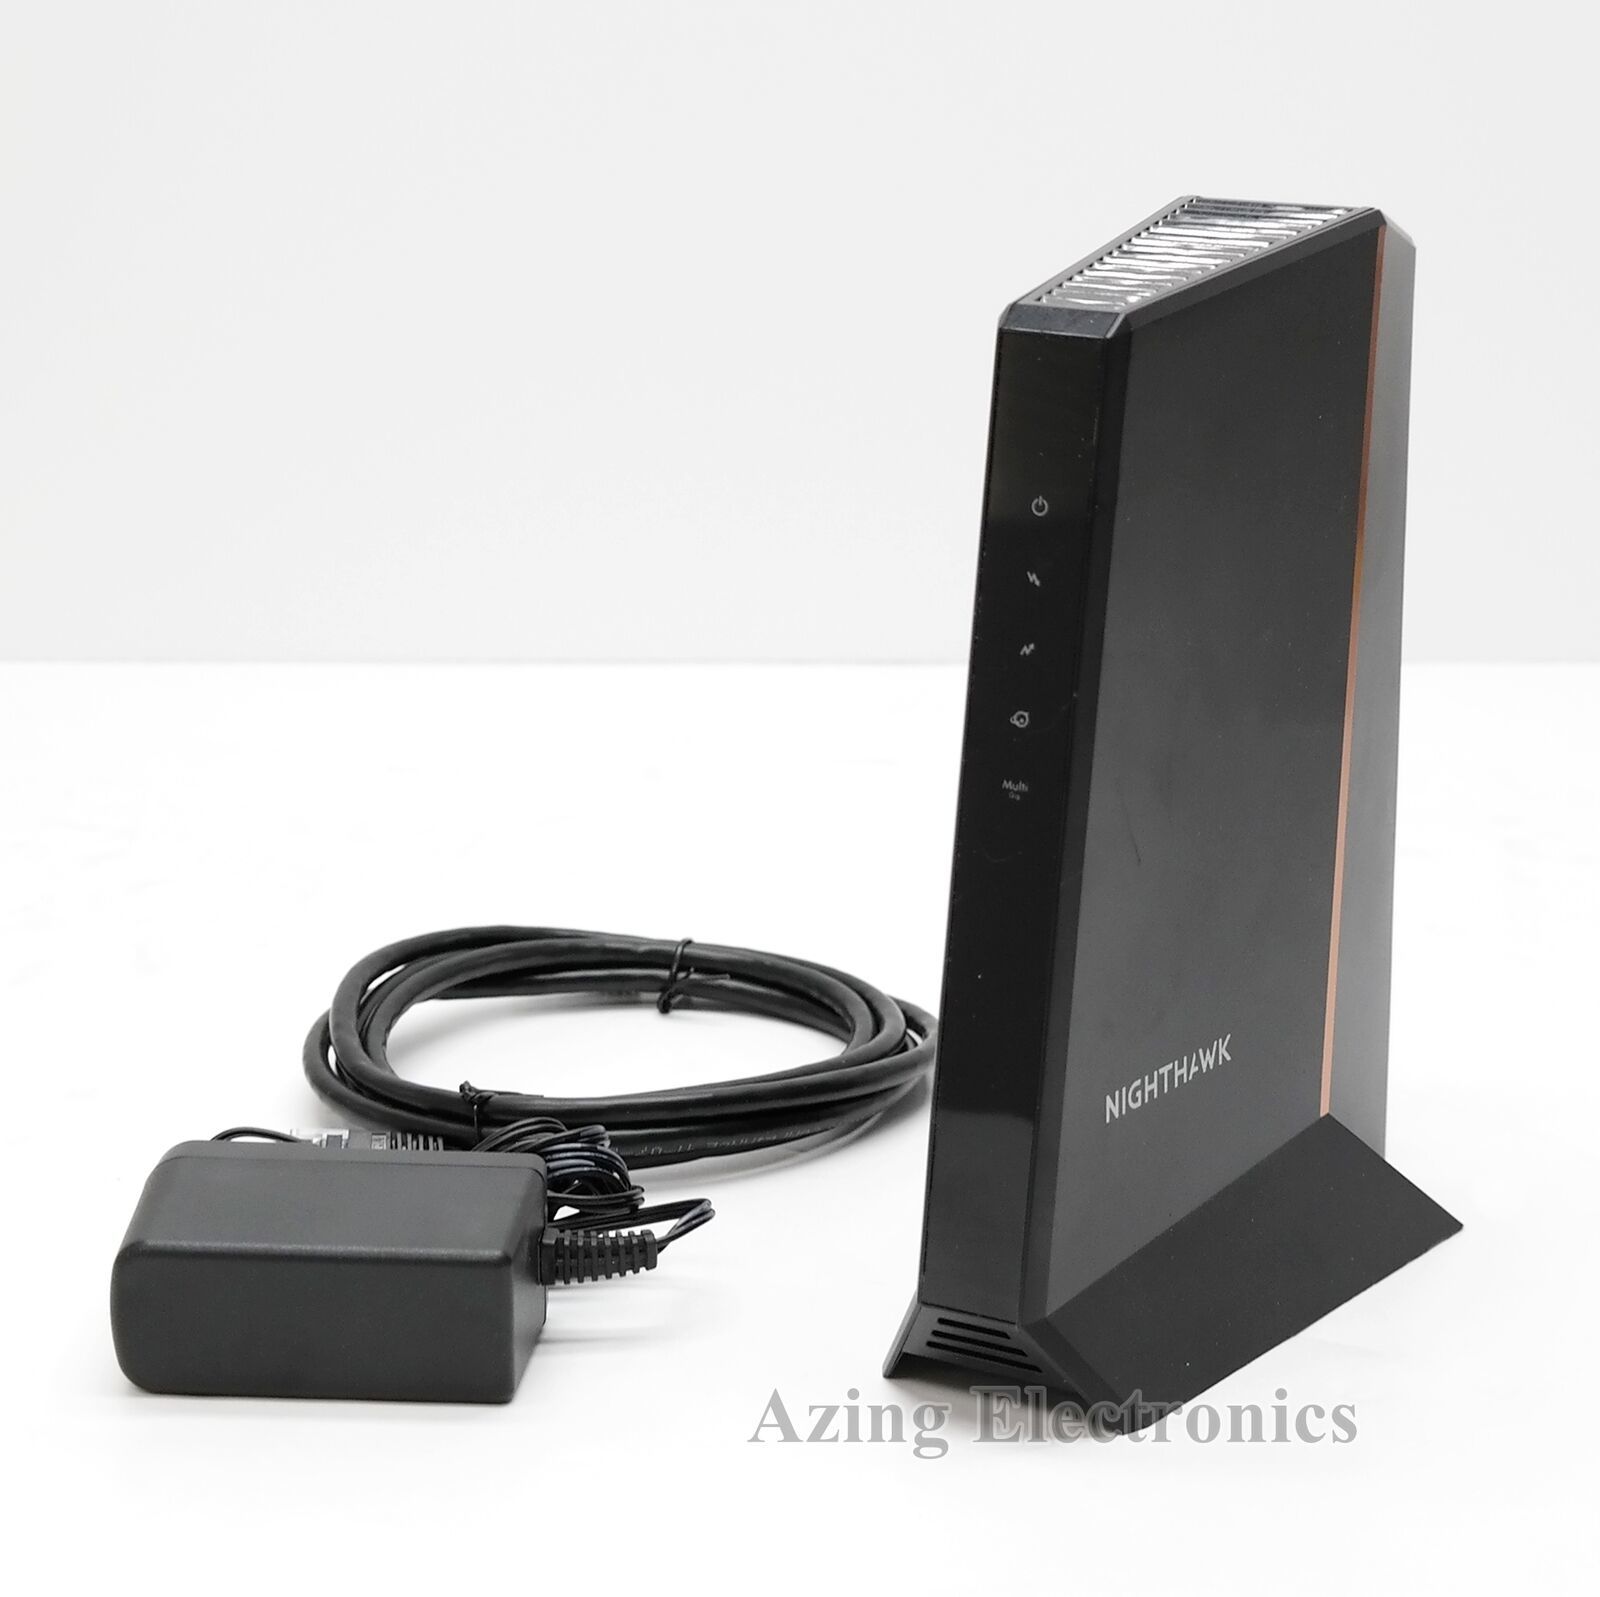 Primary image for NETGEAR CM2000 Nighthawk DOCSIS 3.1 Cable Modem